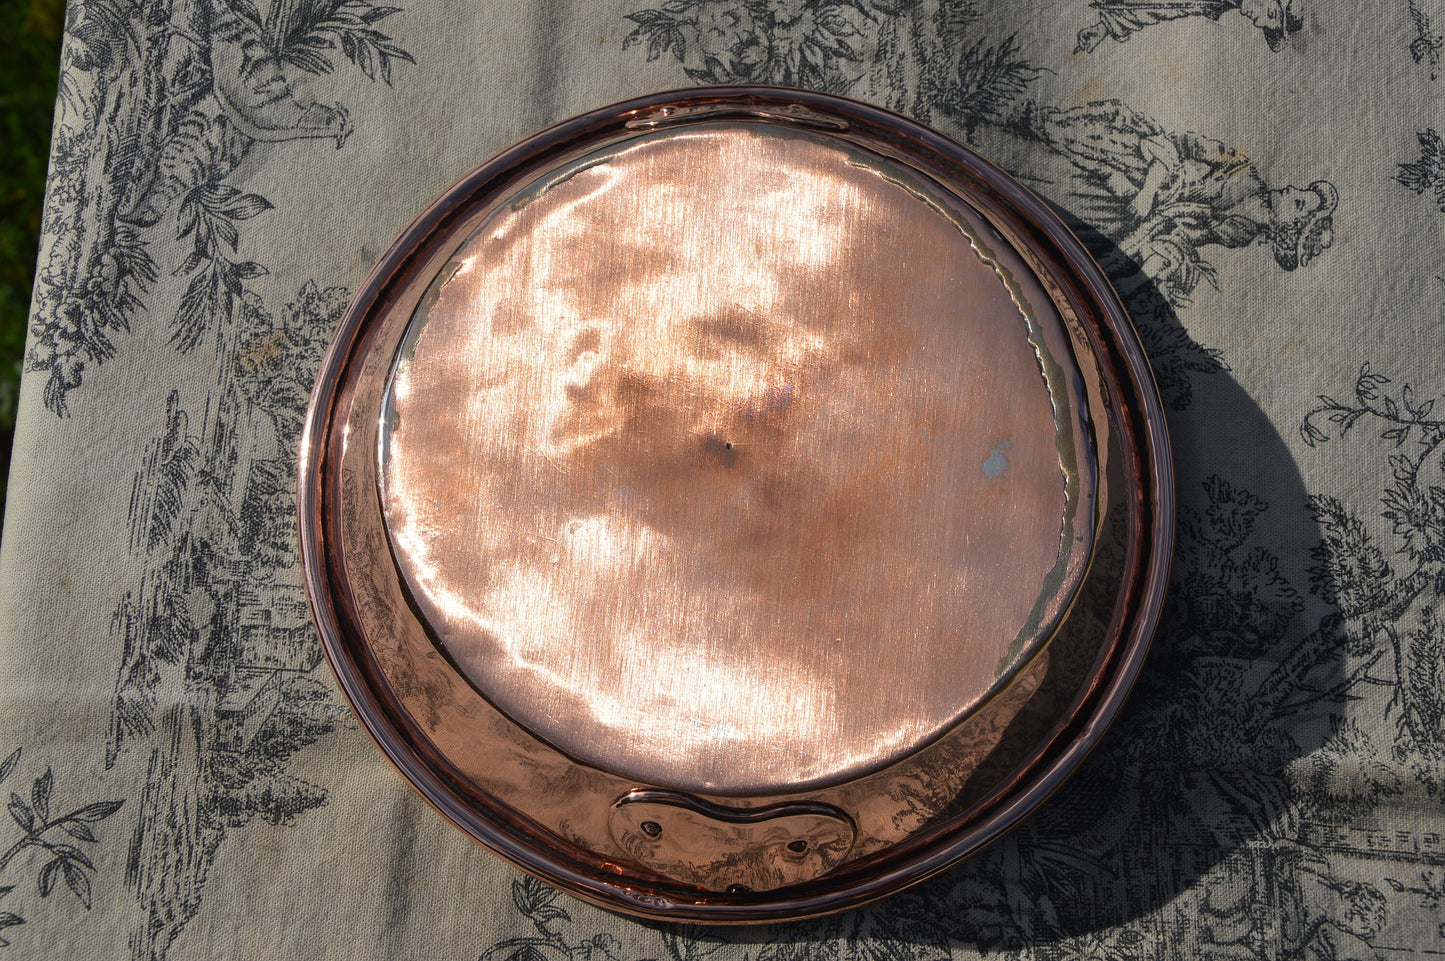 Copper Gratin Pan 19cm 7 1/2 Inch French Antique Copper New Villedieu Tin Roasting Dish Round Oven Repaired Base No Handles Villedieu Tin